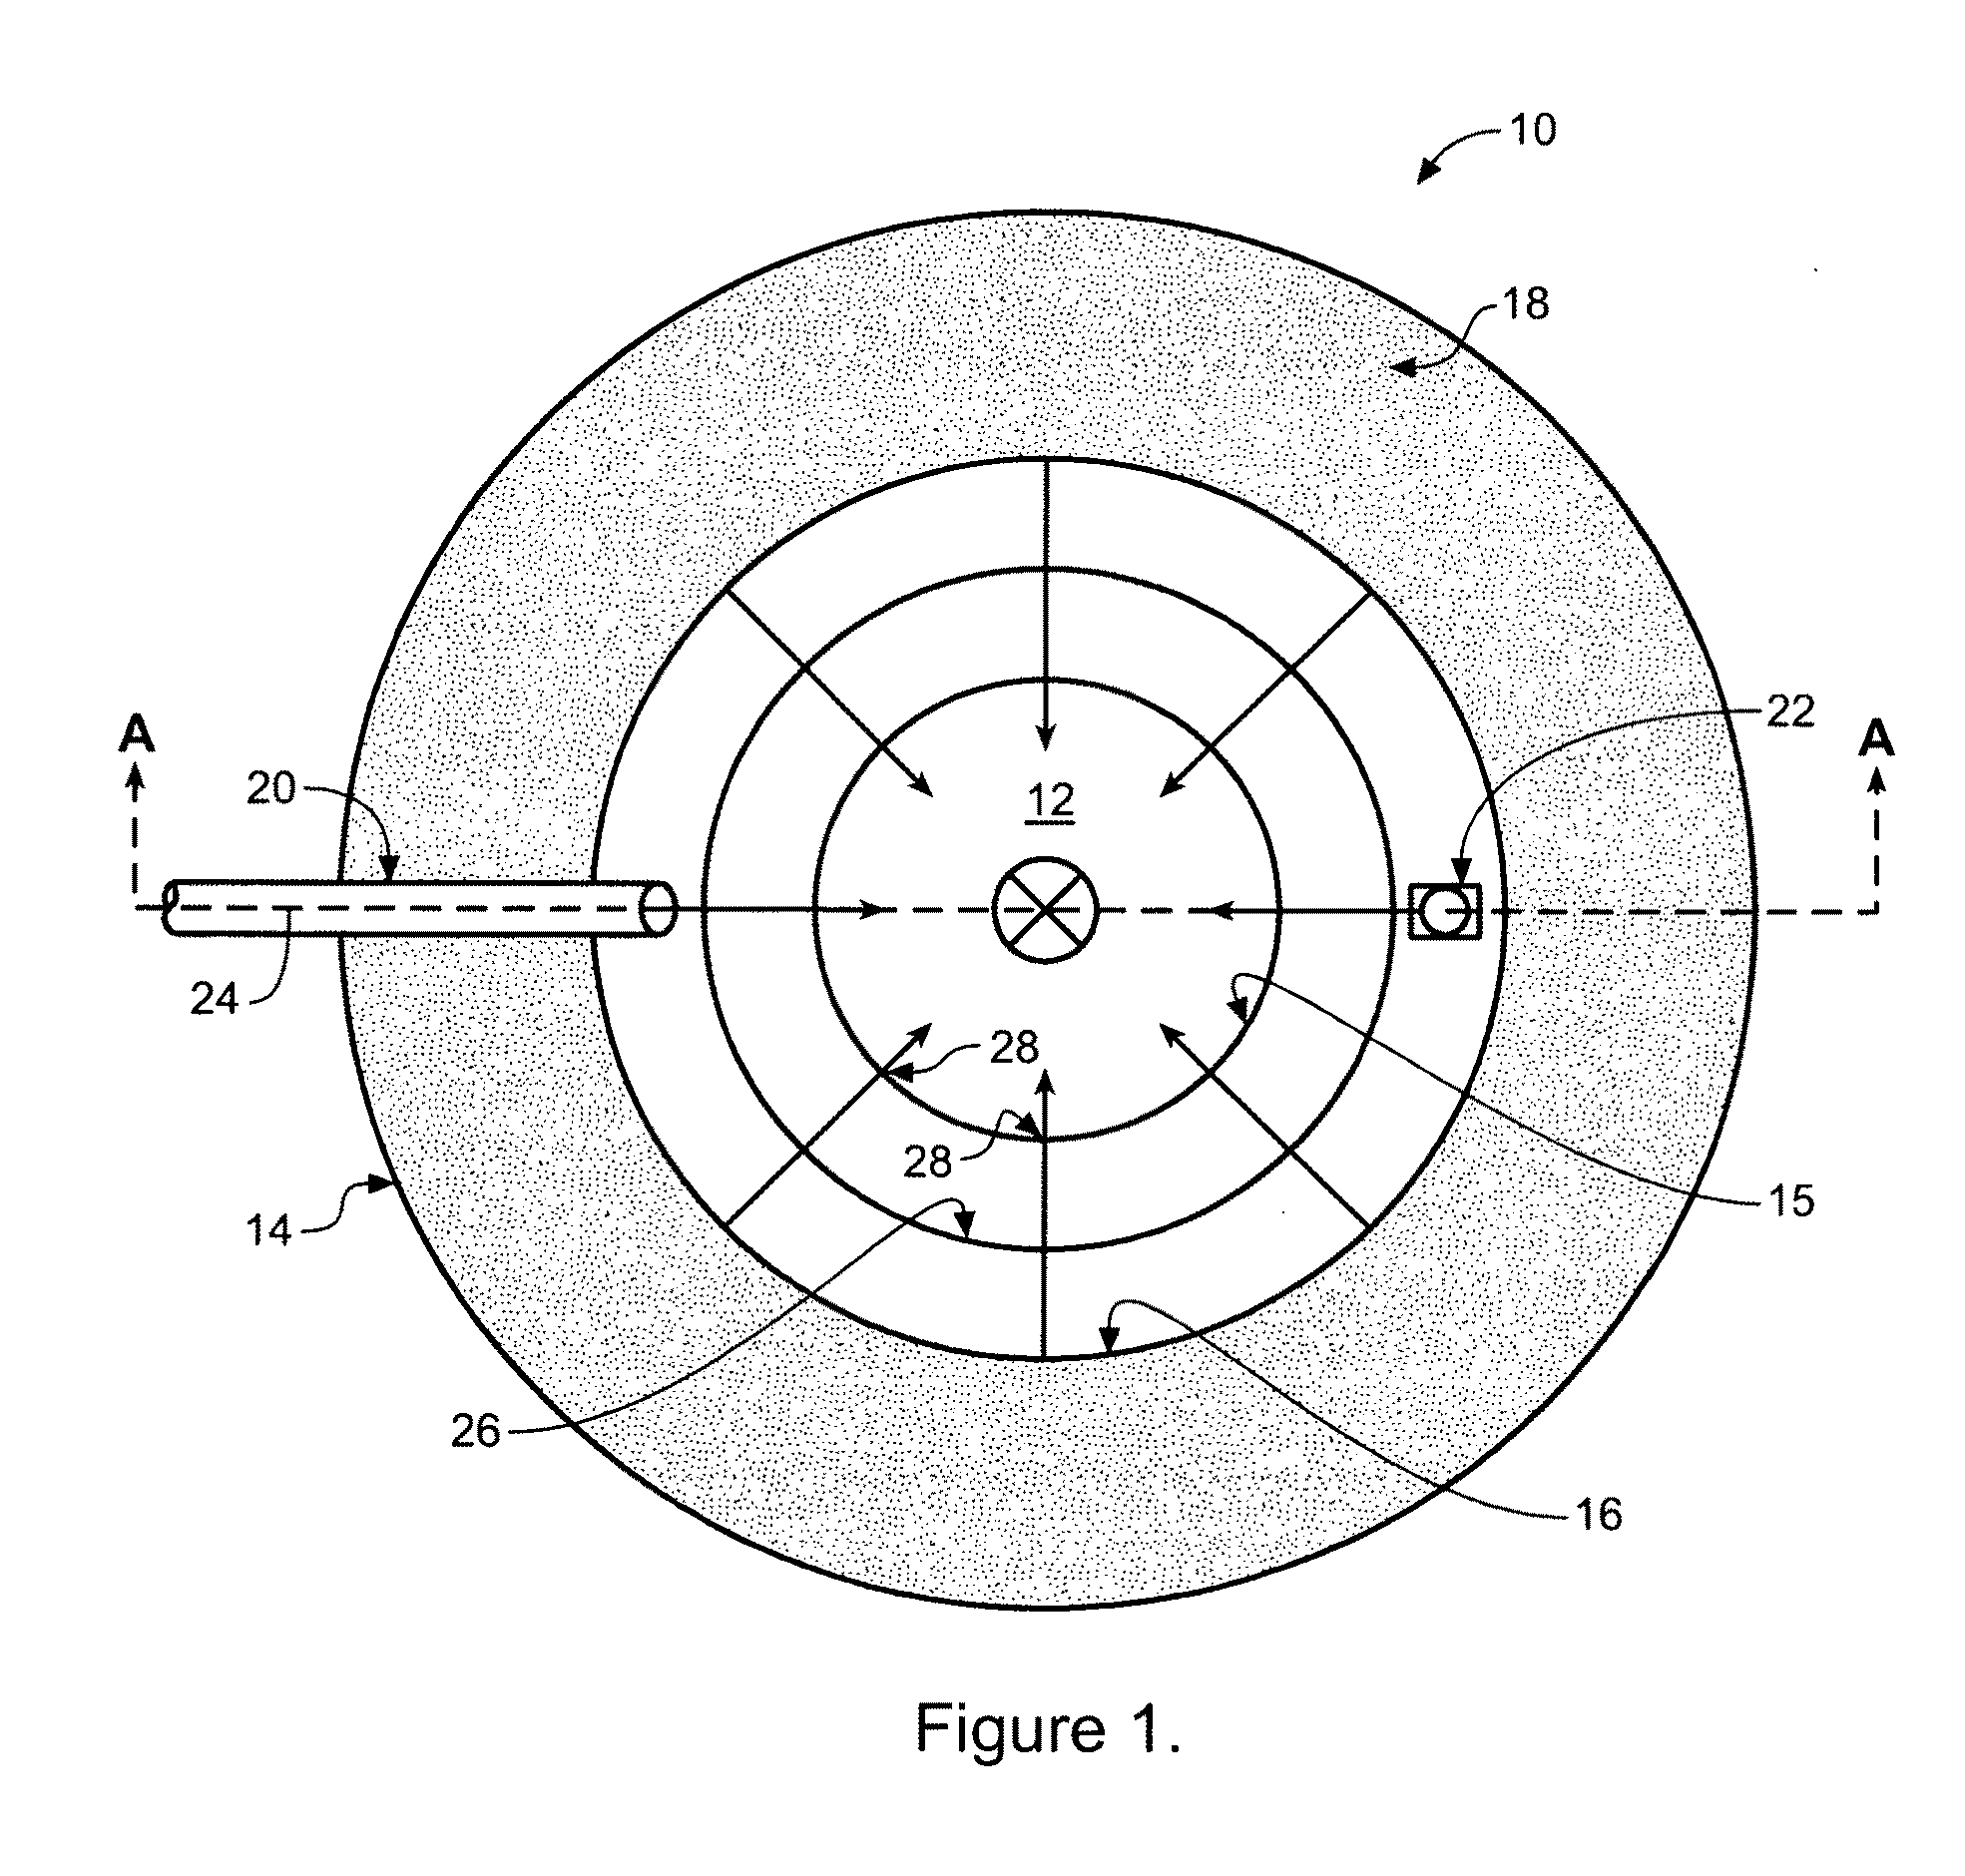 Radially inwardly directed electron beam source and window assembly for electron beam source or other source of electromagnetic radiation